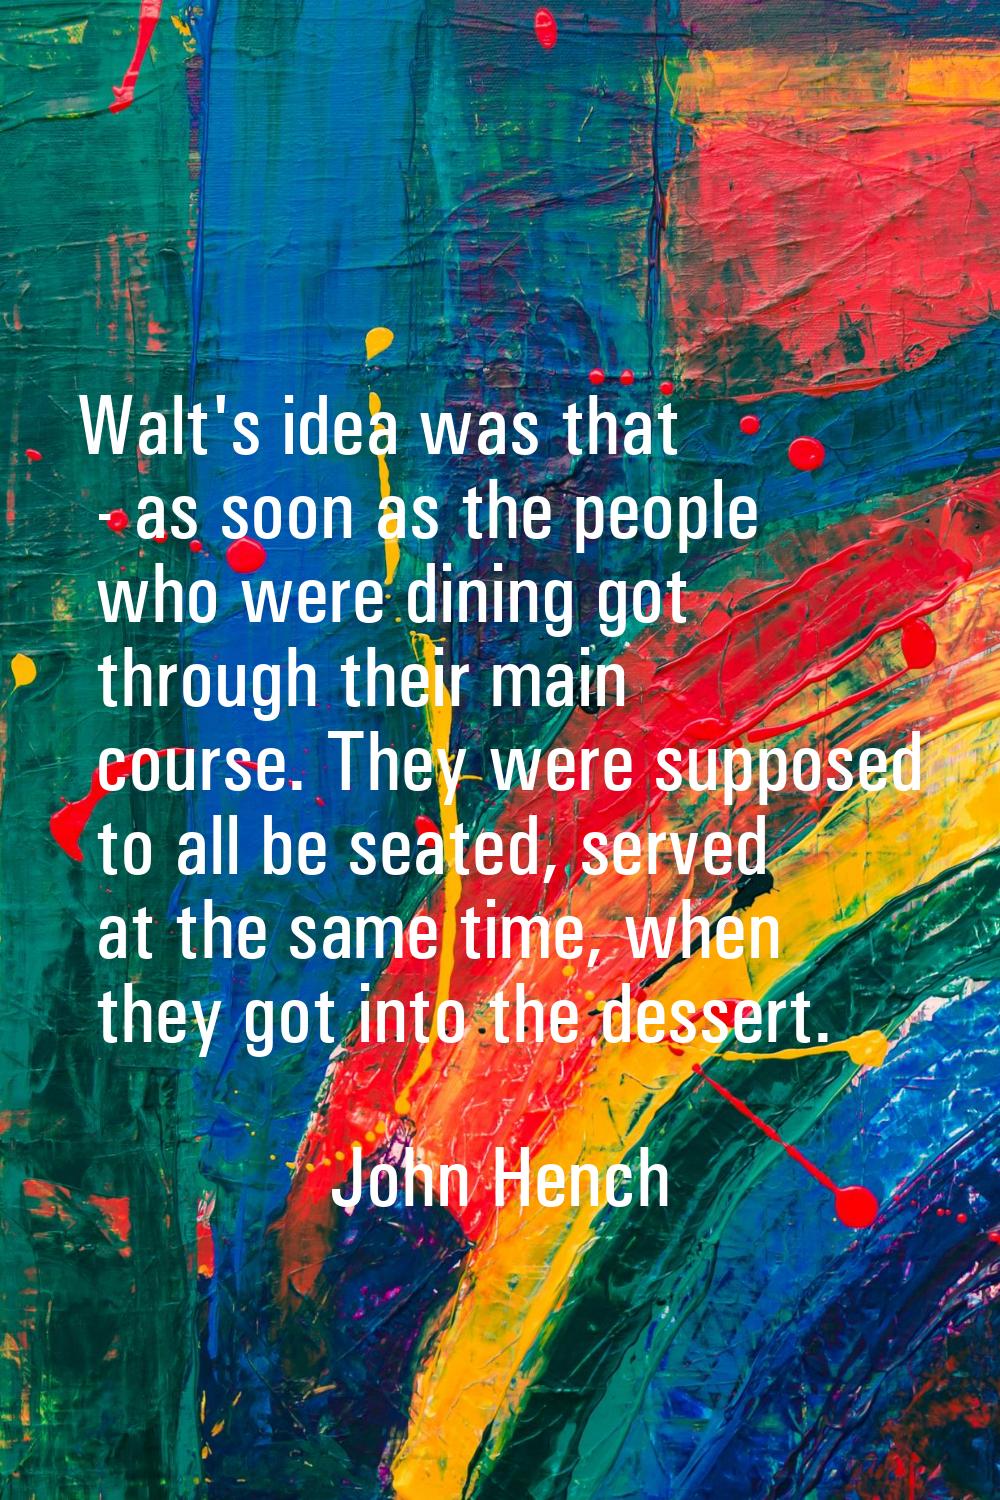 Walt's idea was that - as soon as the people who were dining got through their main course. They we